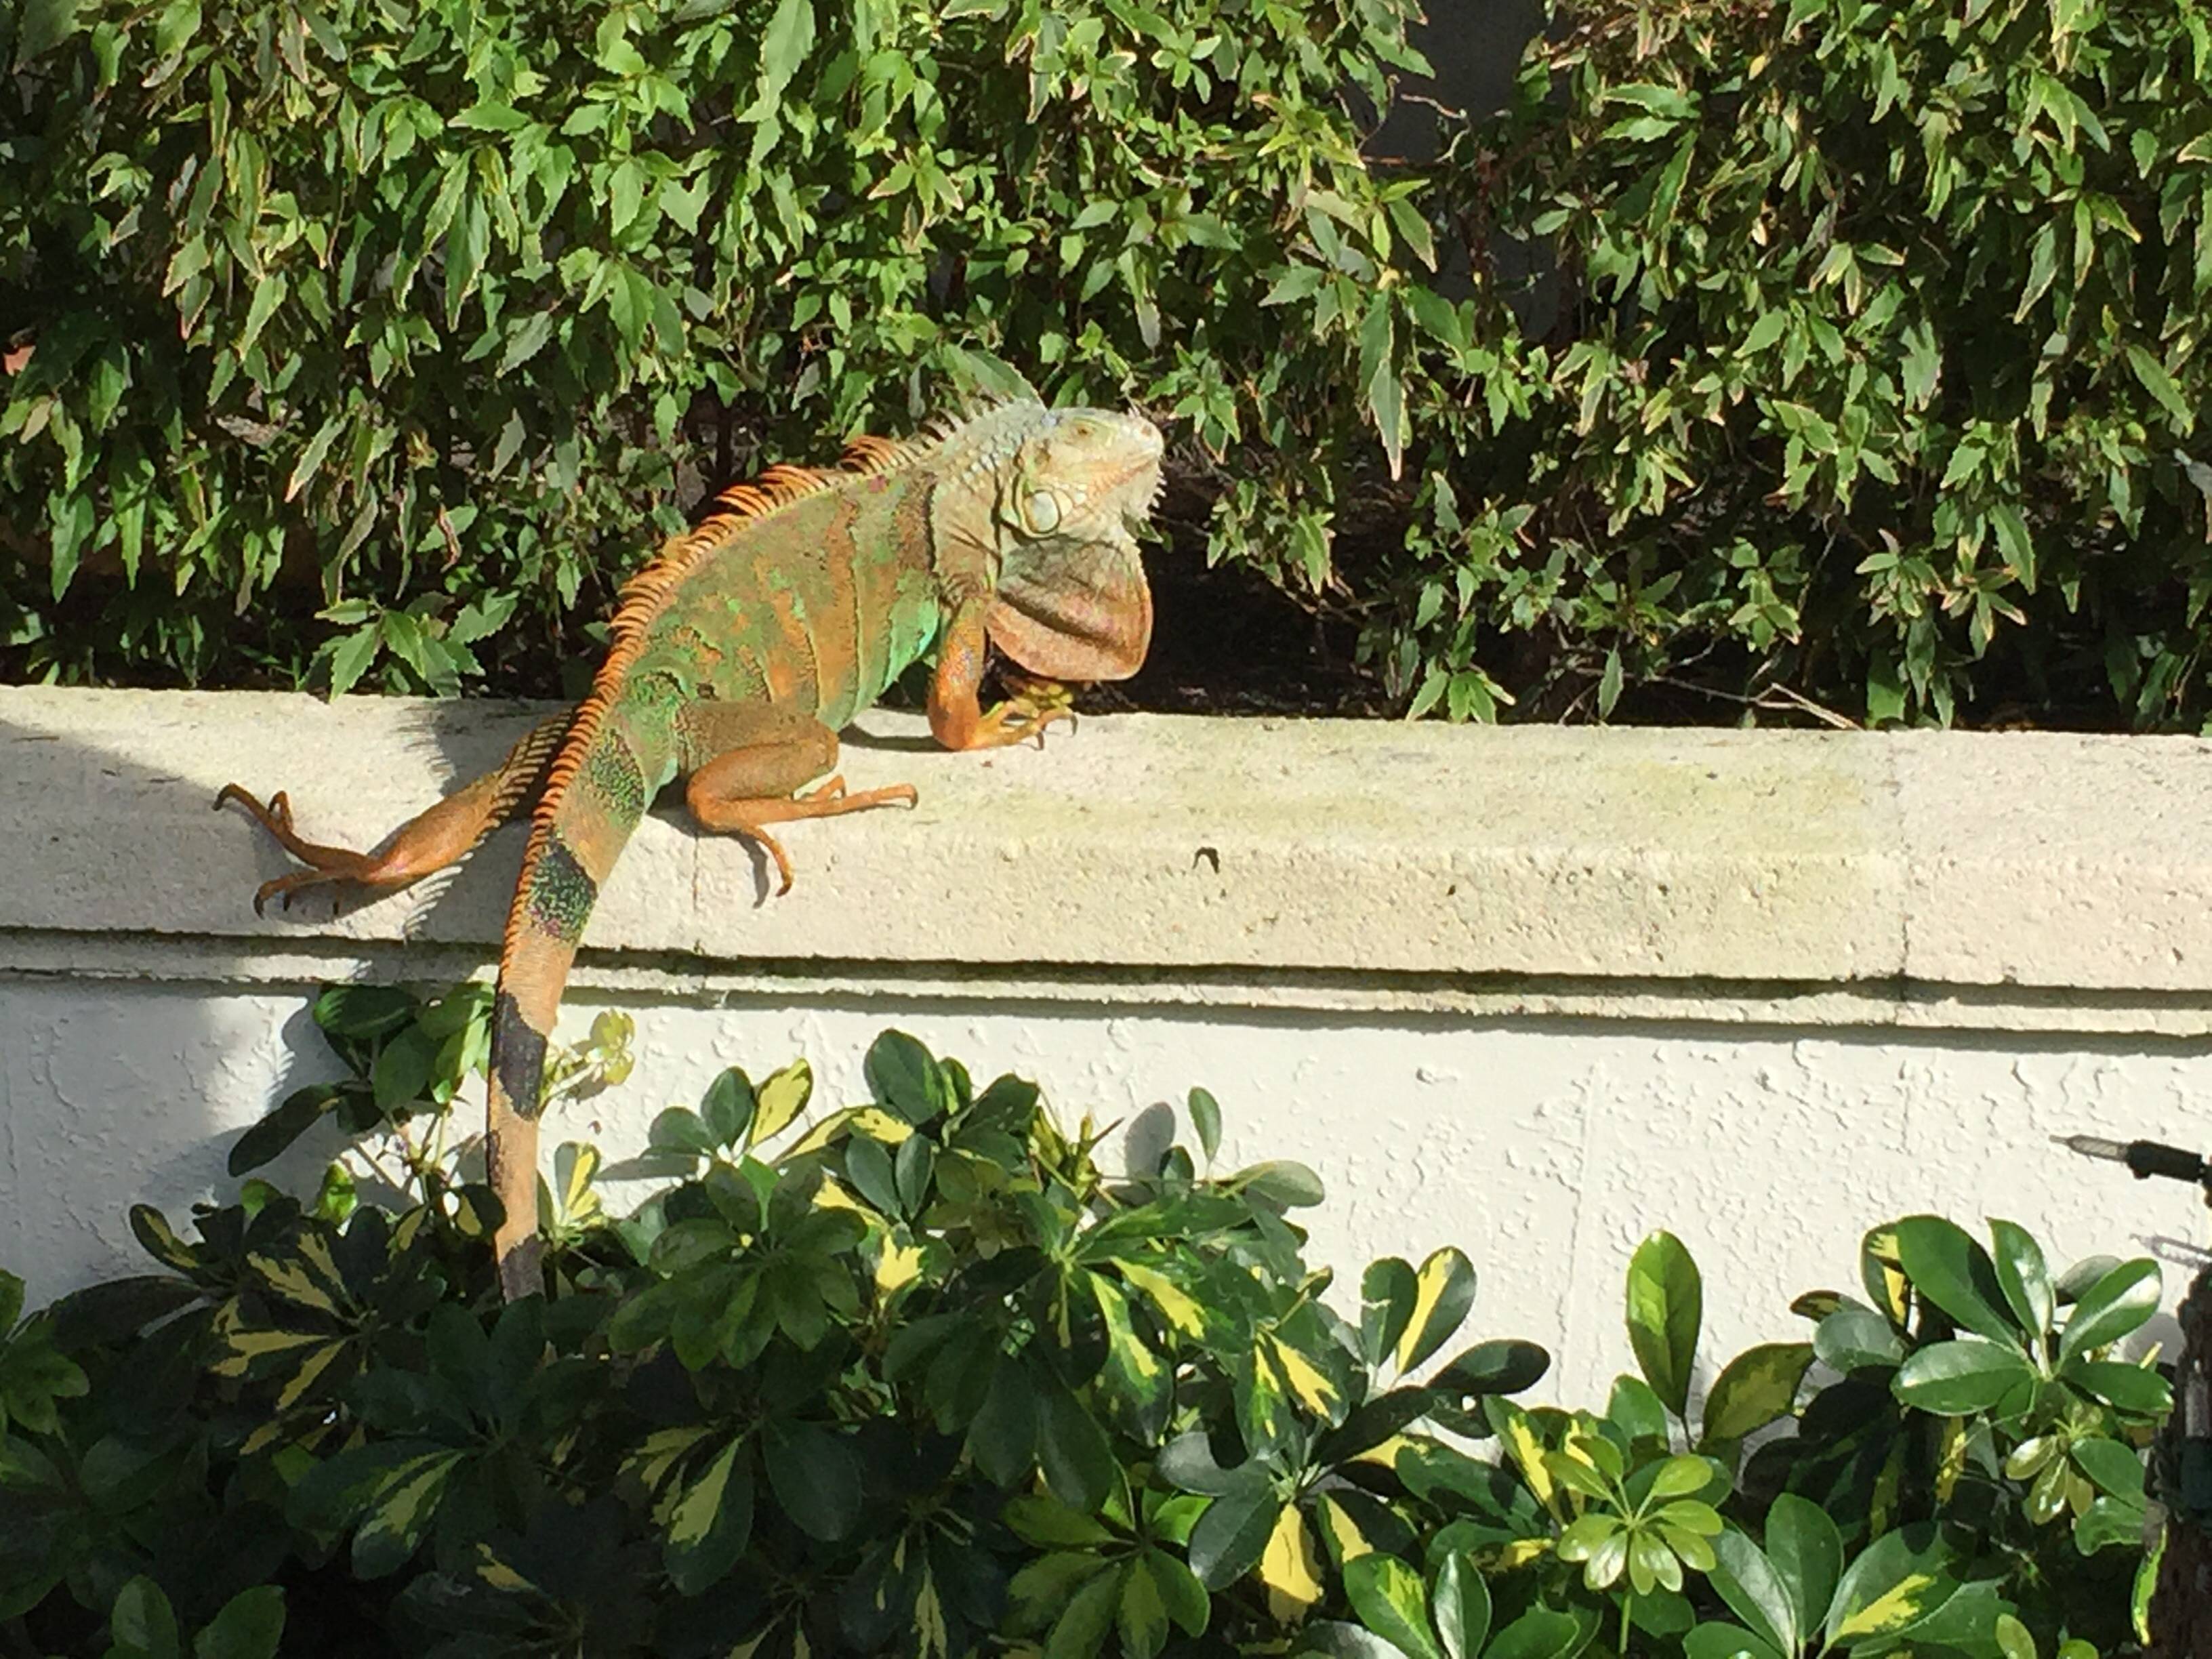 Nicely colored wild iguana hanging out in North Miami : reptiles